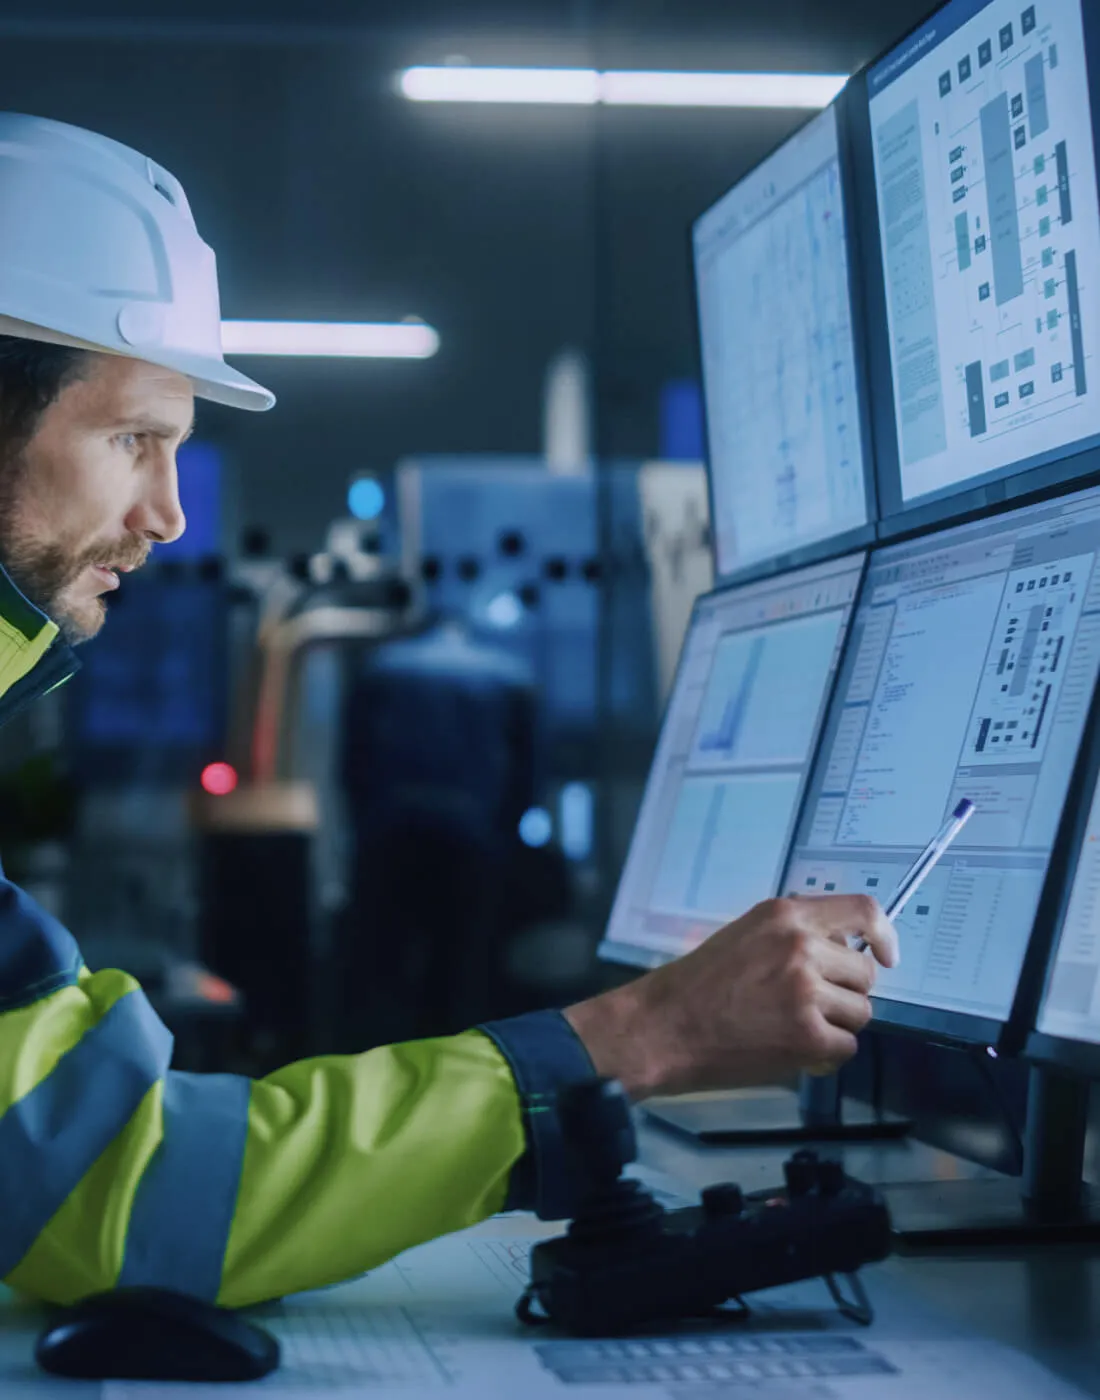 bearded man wearing a hardhat and safety jacket and is pointing at one of many monitors at a desk